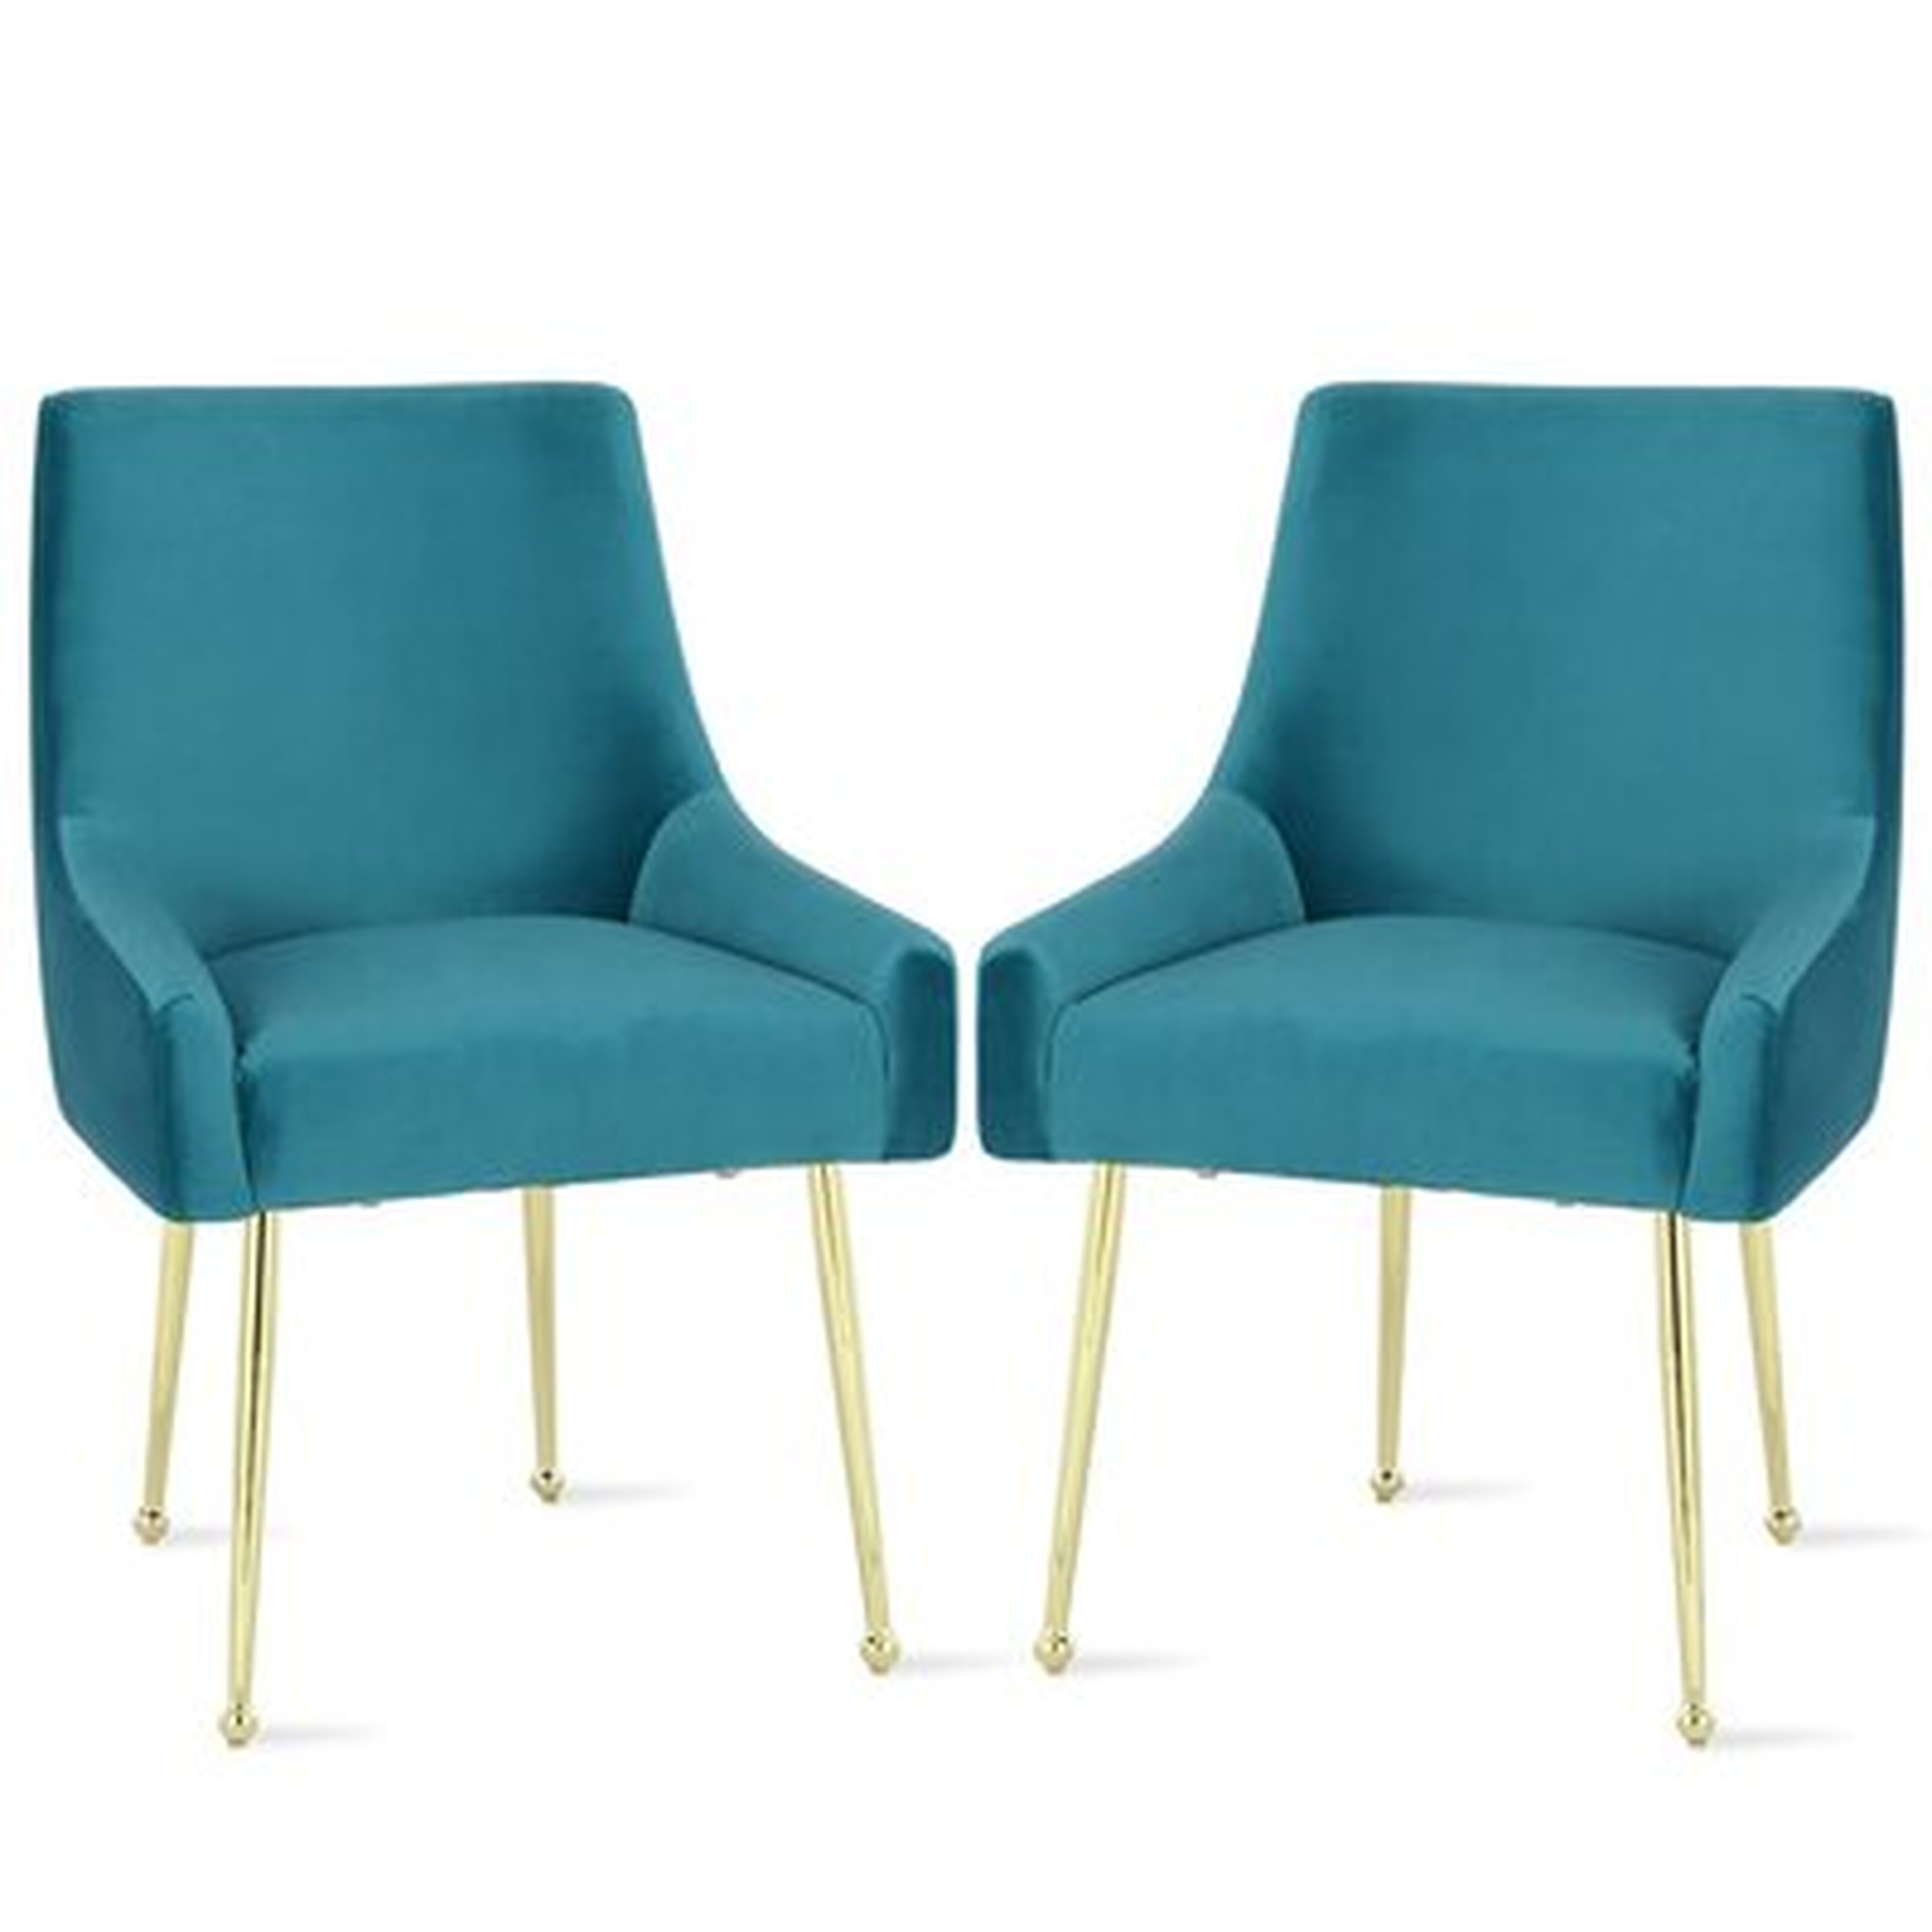 Huxley Upholstered Dining Chair (Set of 2) - Wayfair